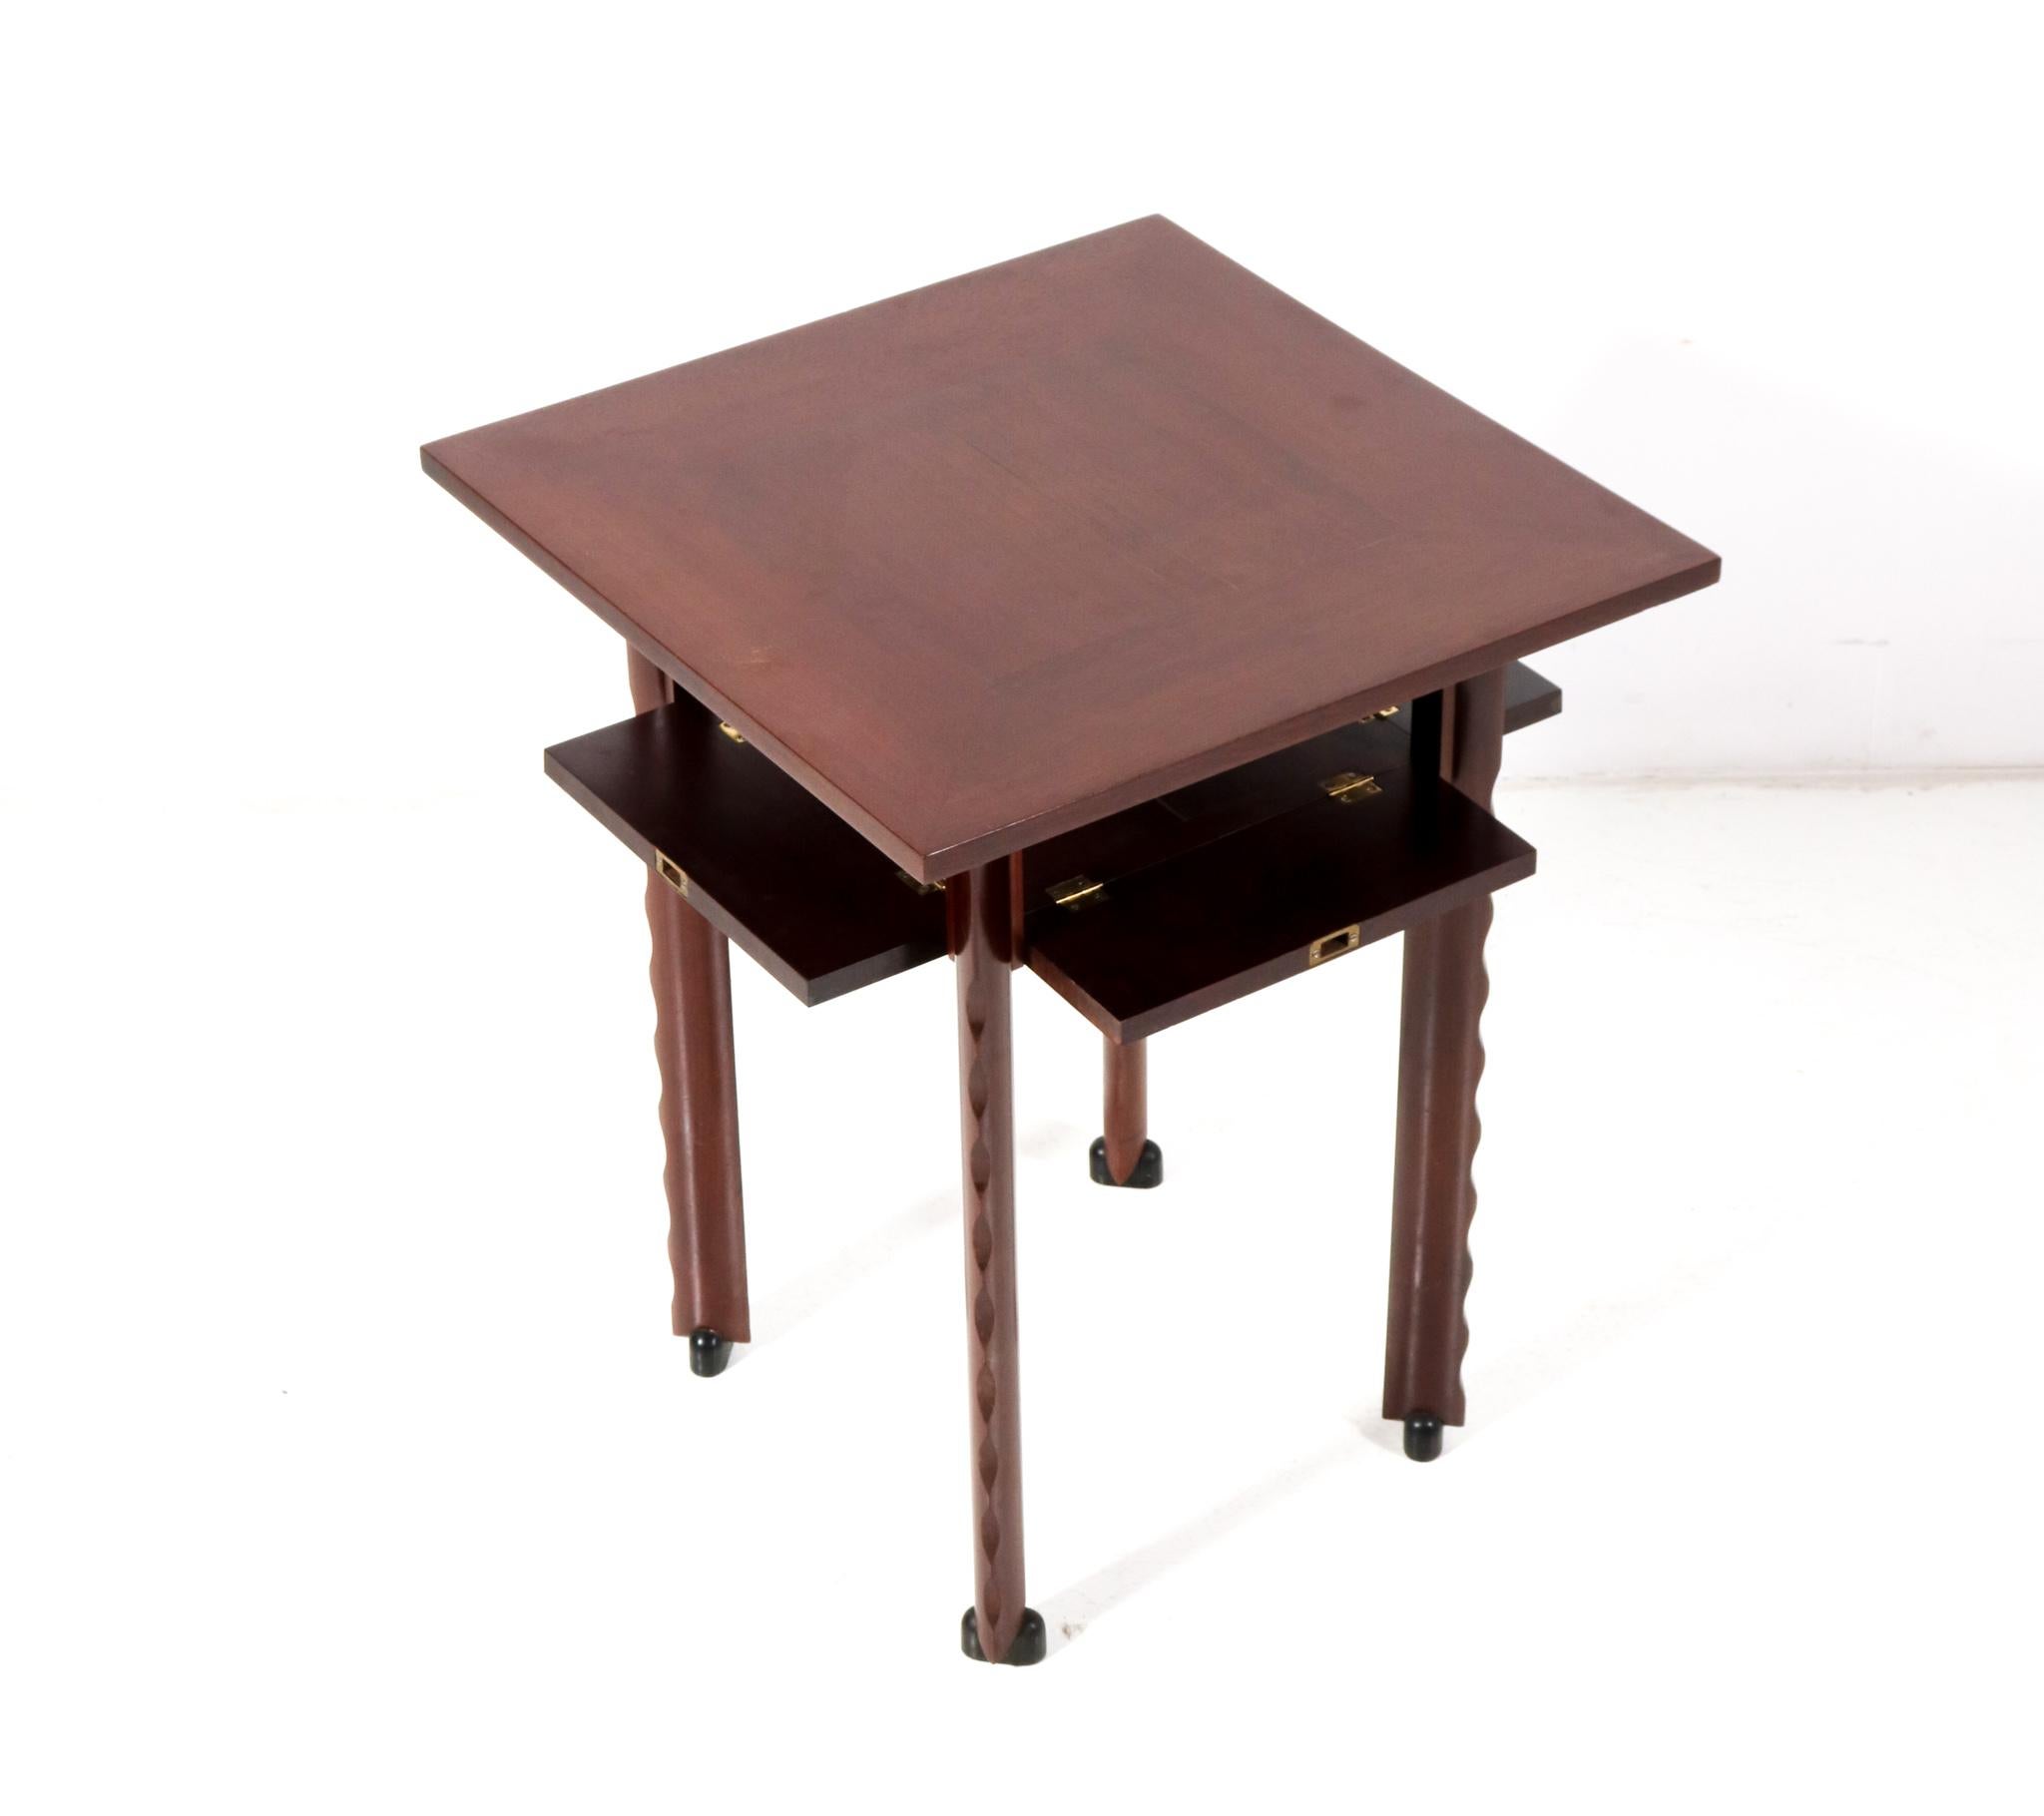 Walnut Art Deco Amsterdamse School Game Table by C.H. Eckhart, 1920s For Sale 1